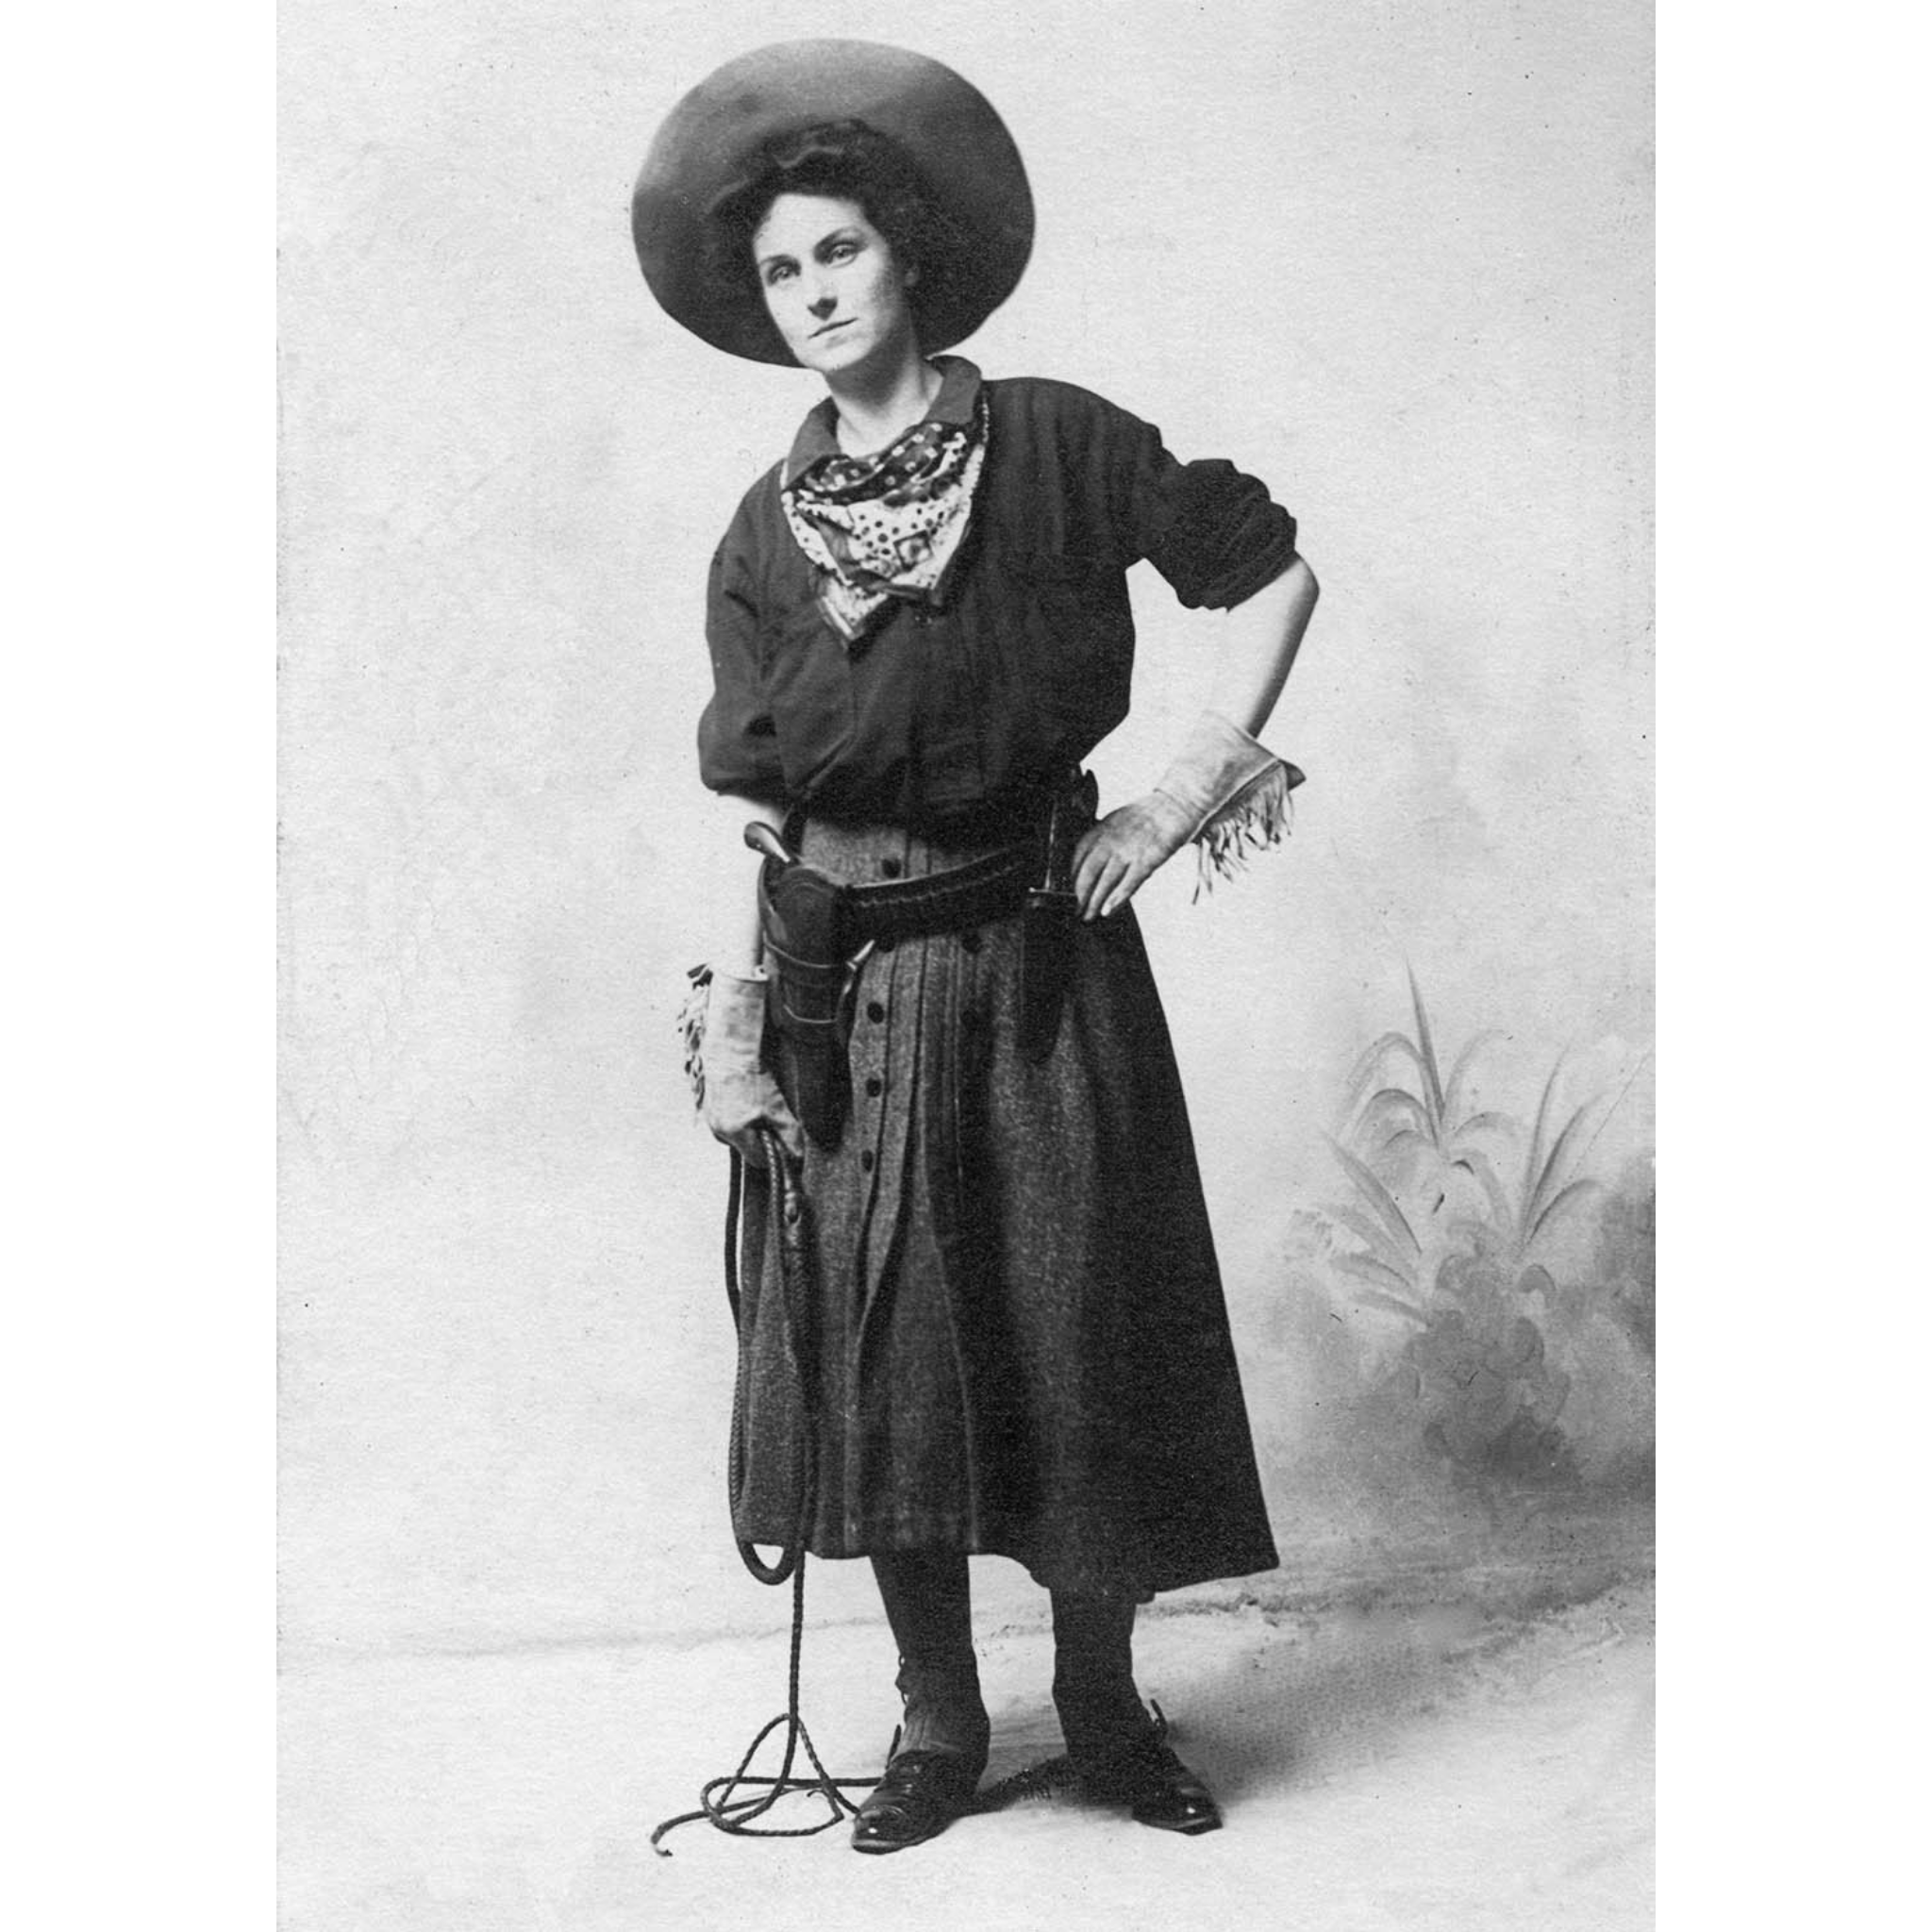 Cowgirl Holding Whip - ca. 1915 Photograph